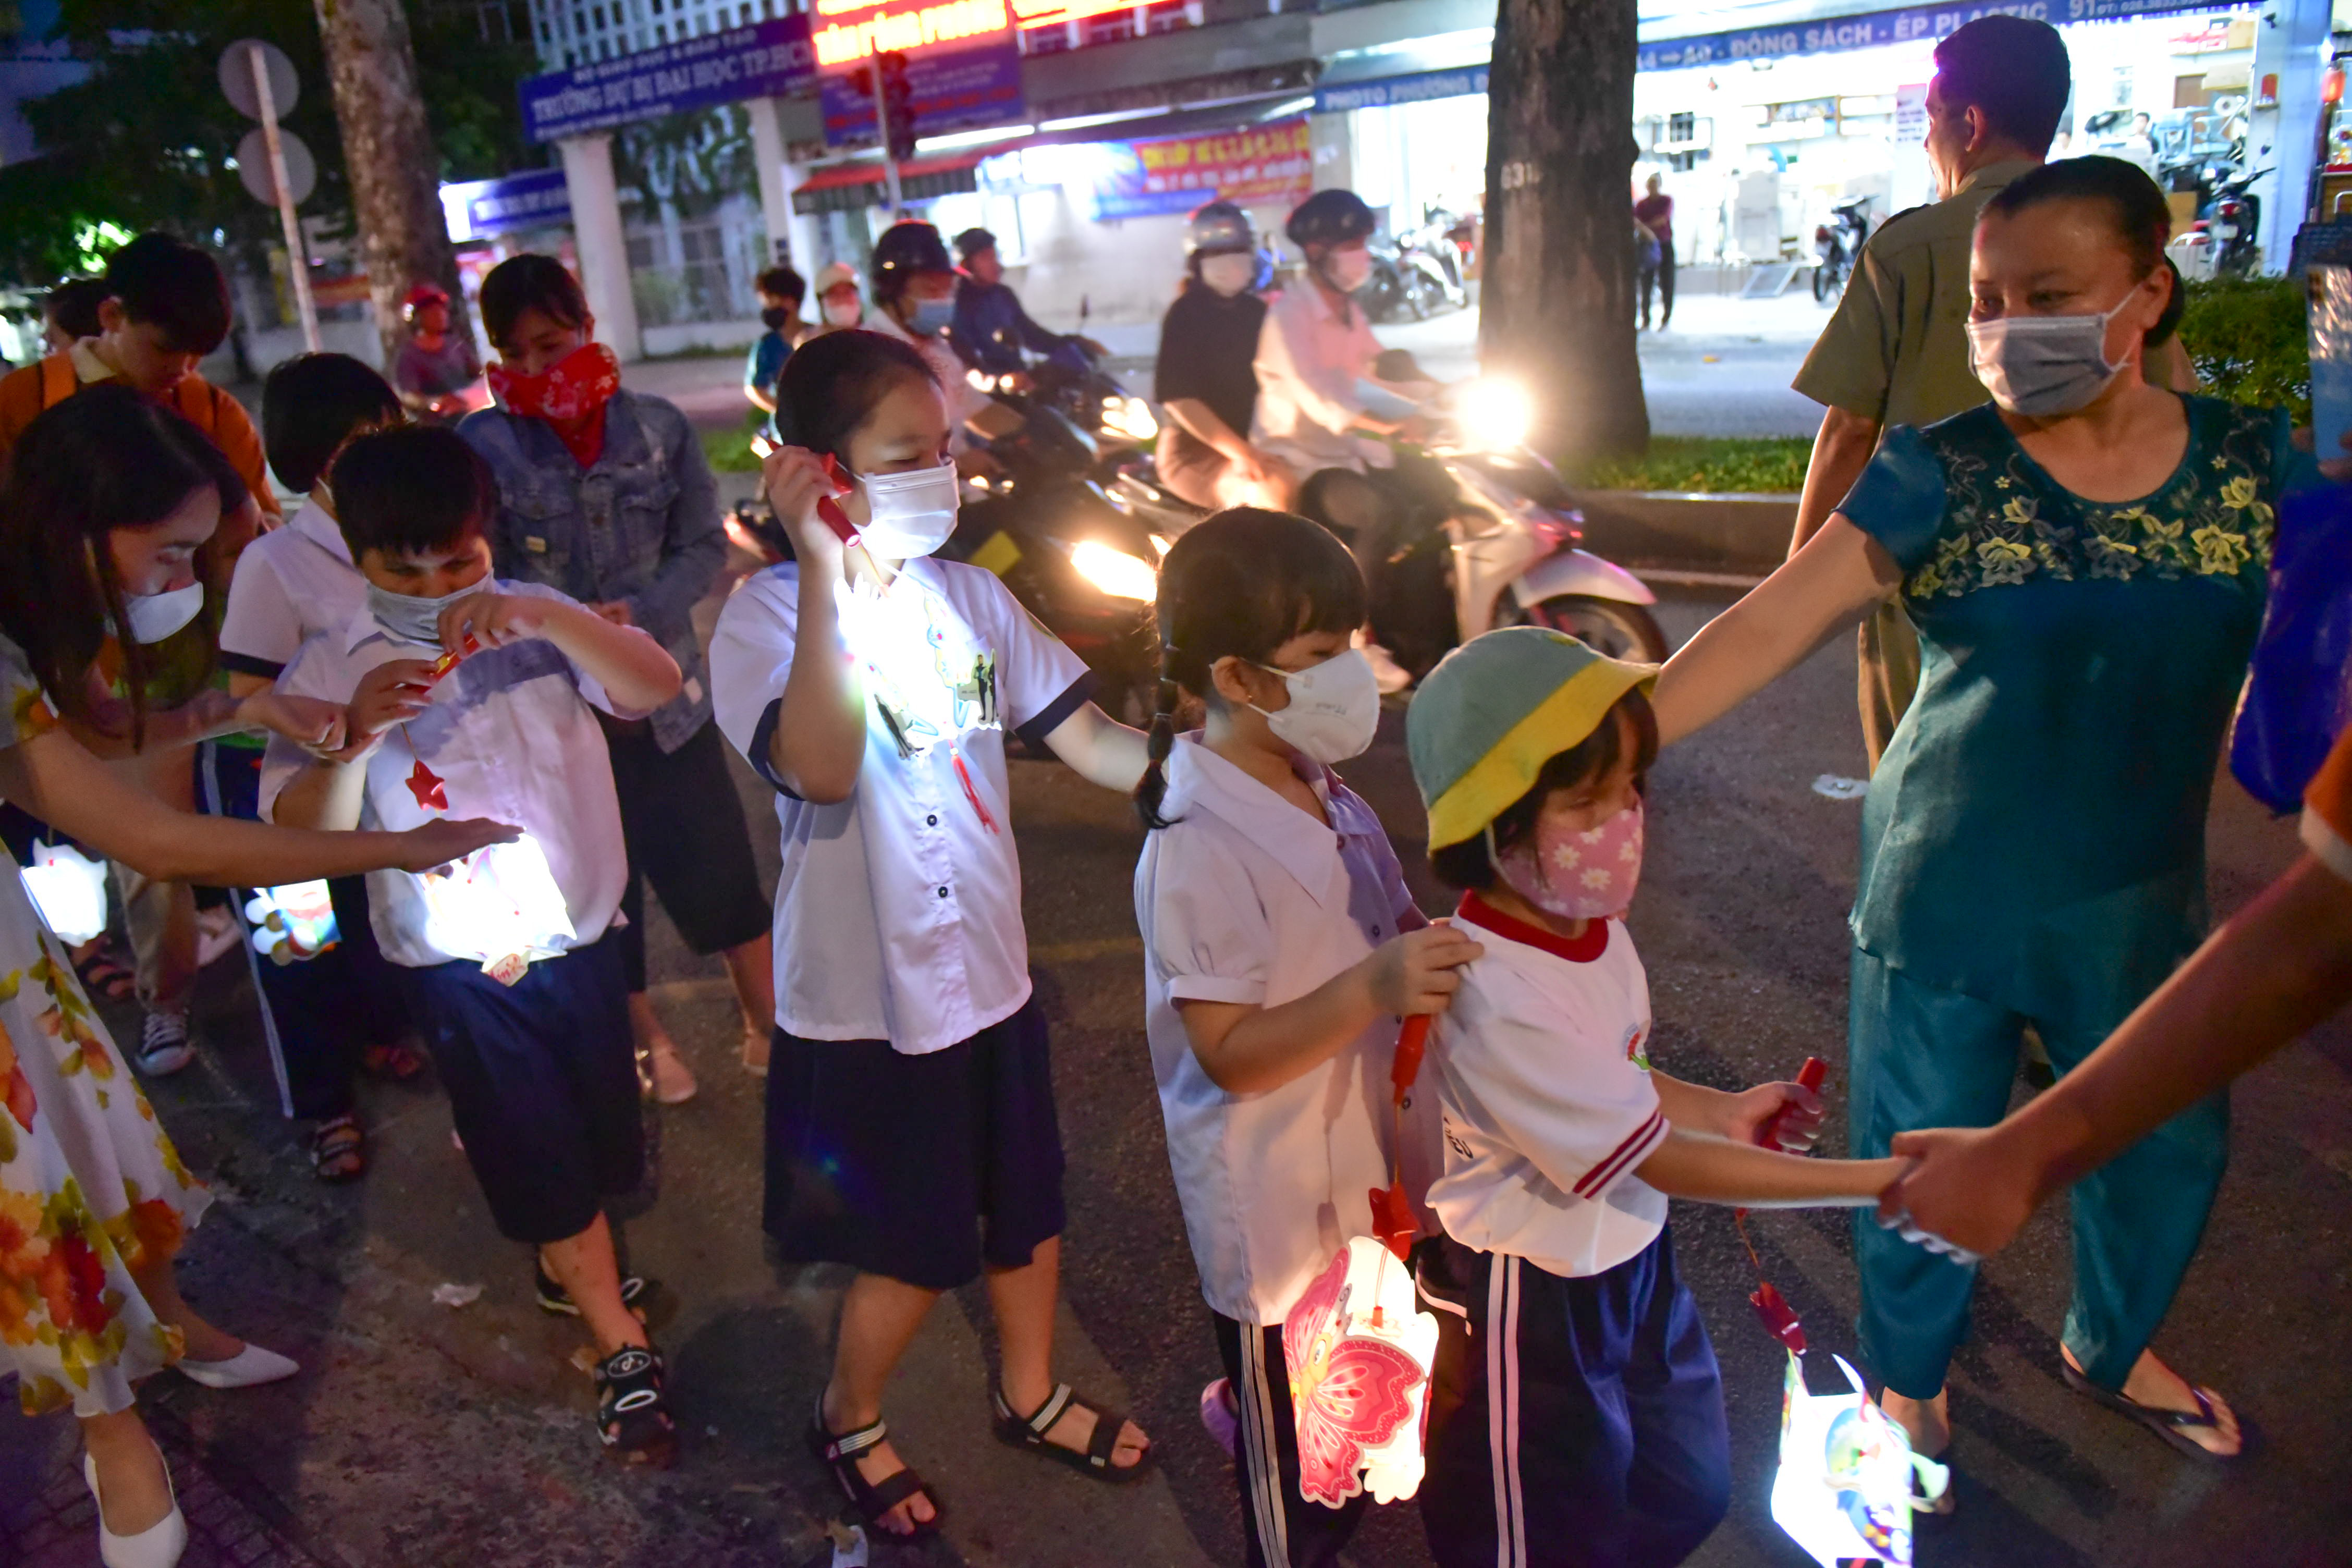 Children assisted by adults while participating in a lantern parade to celebrate the Mid-Autumn Festival held by Nguyen Dinh Chieu Special School for the Blind in District 10, Ho Chi Minh City on September 9, 2022. Photo: Ngoc Phuong / Tuoi Tre News